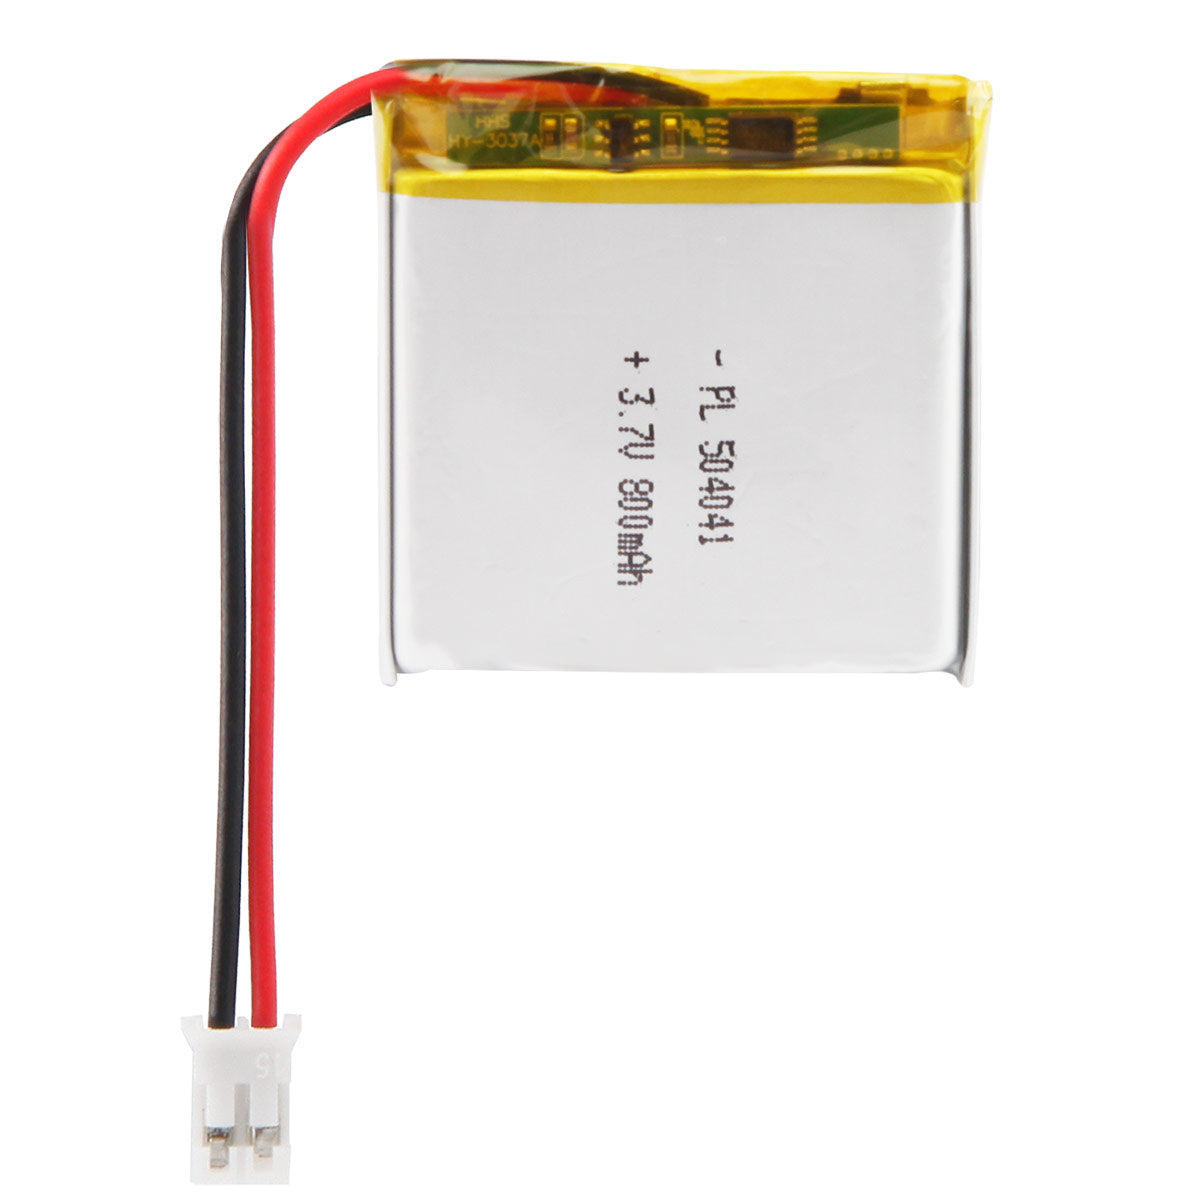 YDL 3.7V 800mAh 504041 Rechargeable Polymer Lithium-Ion Battery Length 43mm